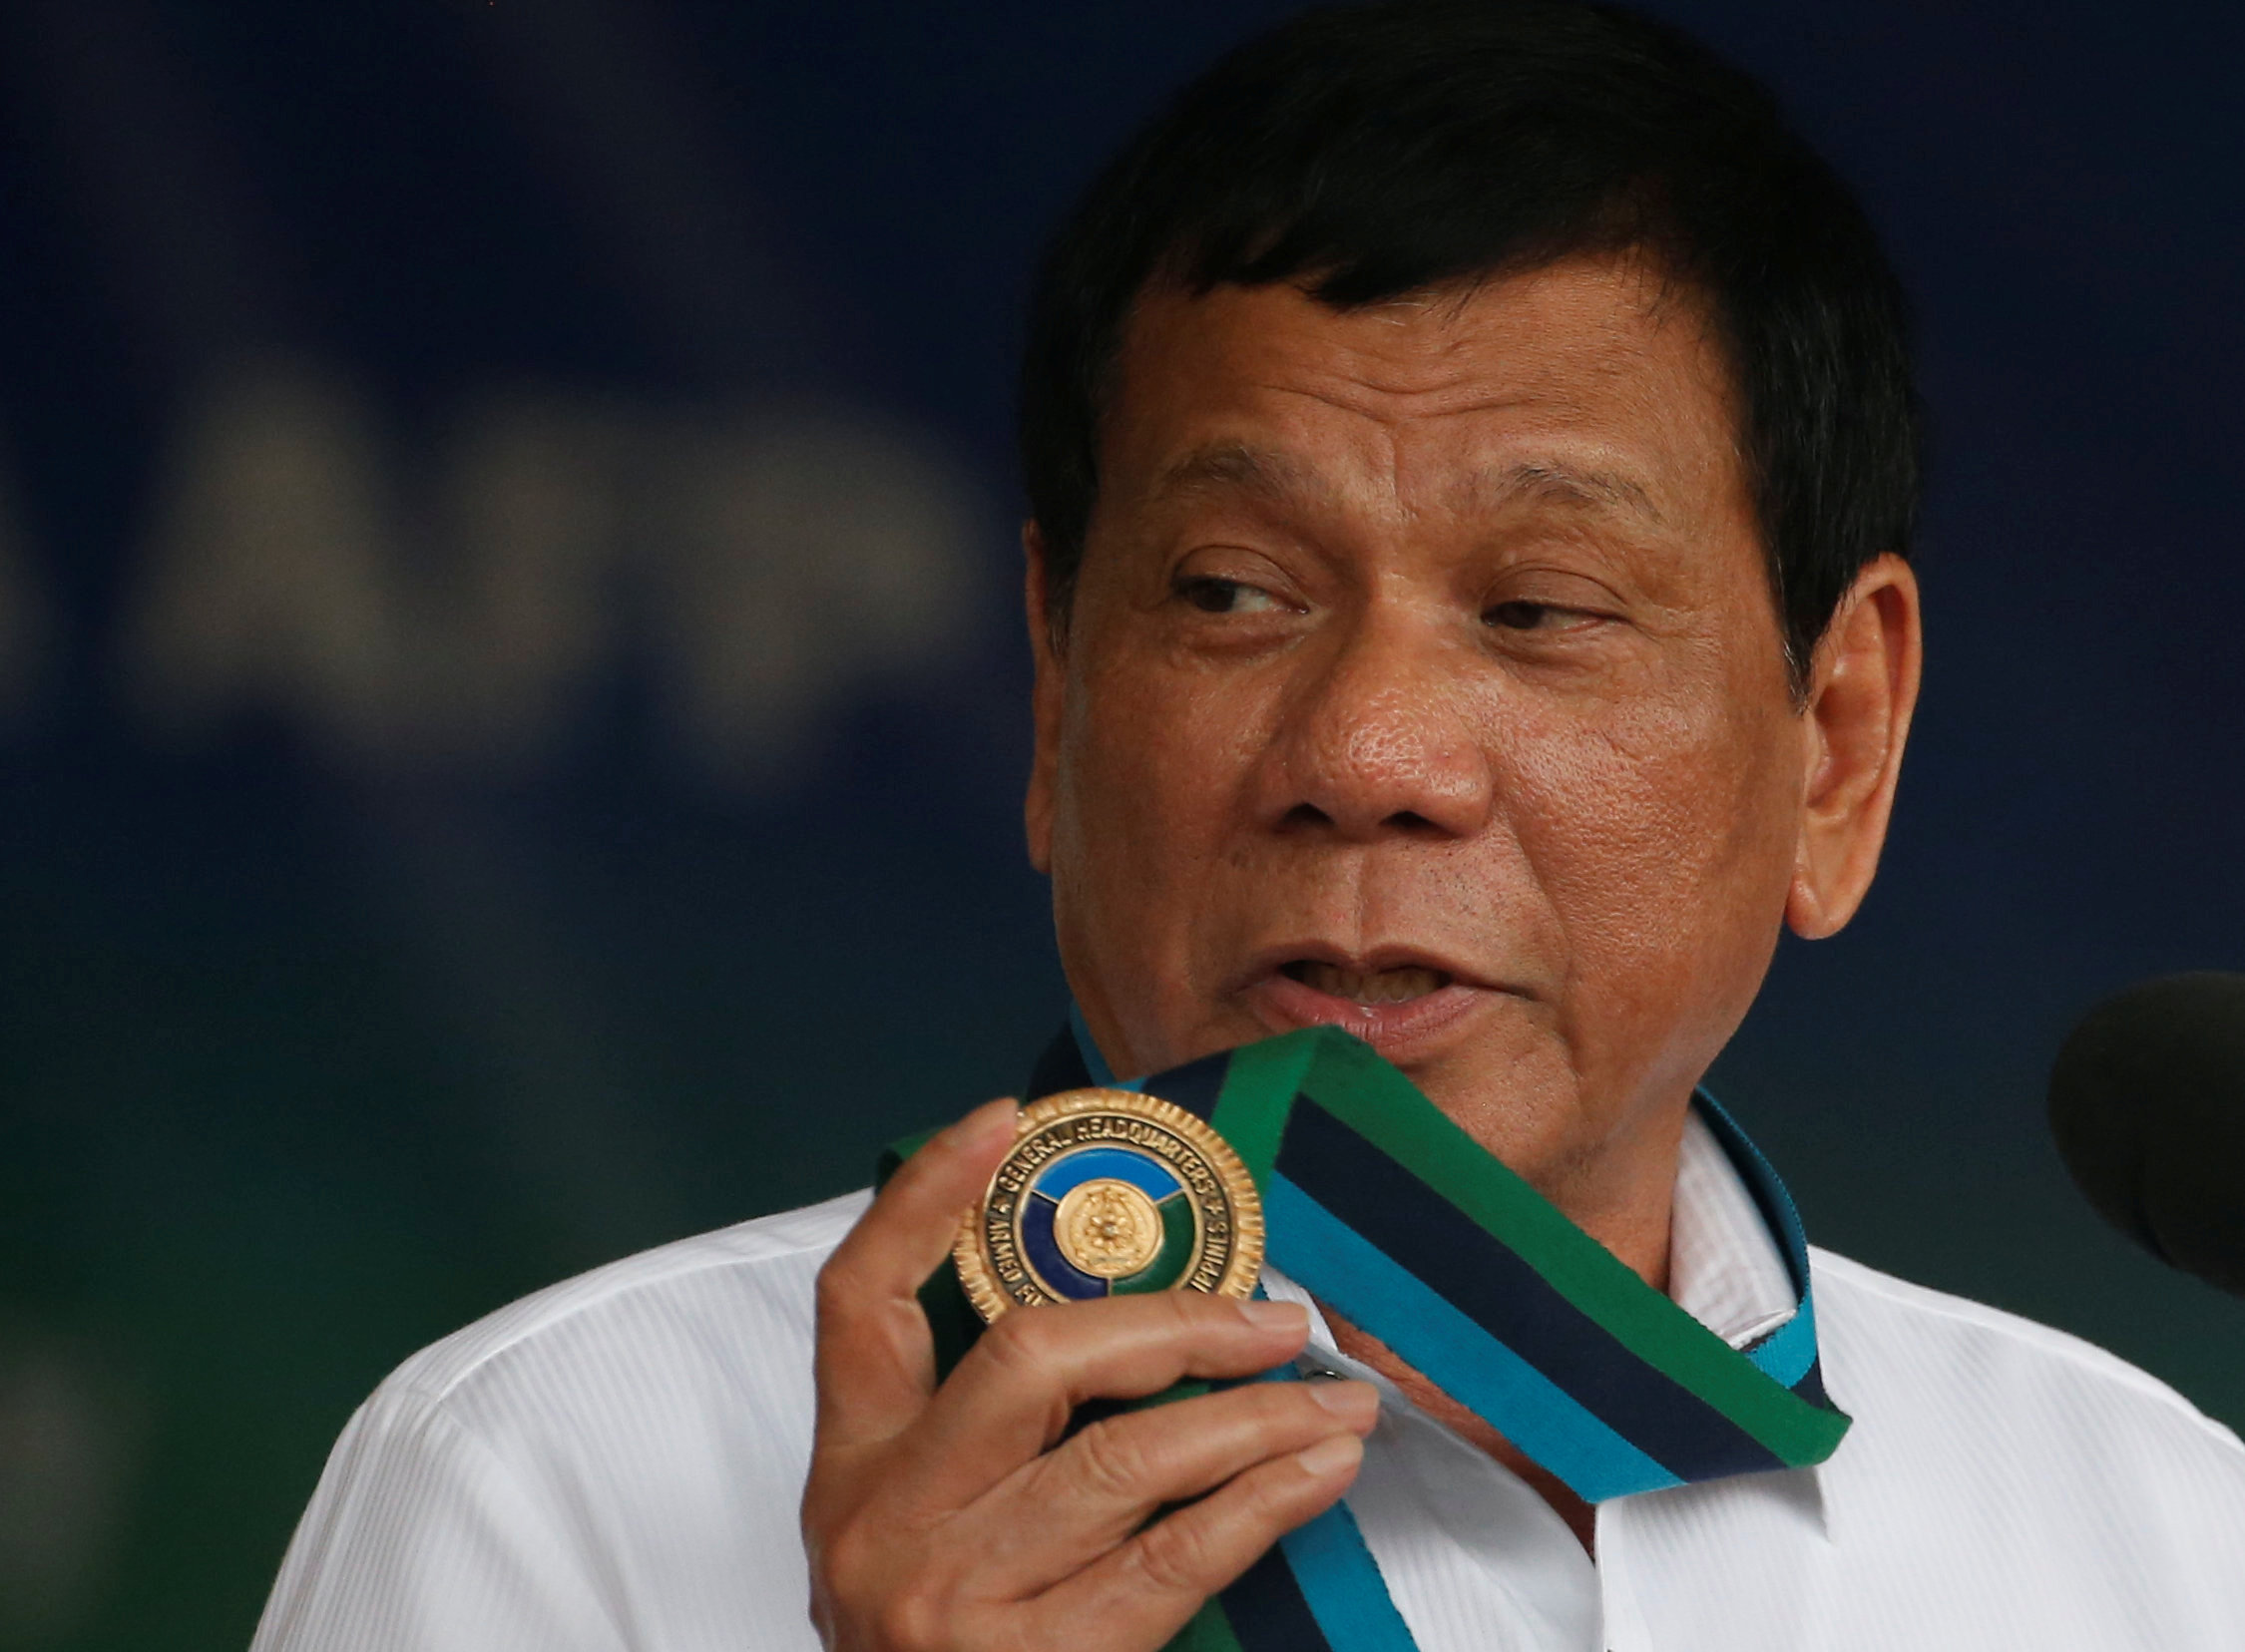 Philippine President Rodrigo Duterte holds an emblem of the Armed forces as he speaks at the change of command for the new Armed Forces chief at a military camp in Quezon city, Metro Manila, December 7, 2016. u00e2u20acu201d Reuters picn